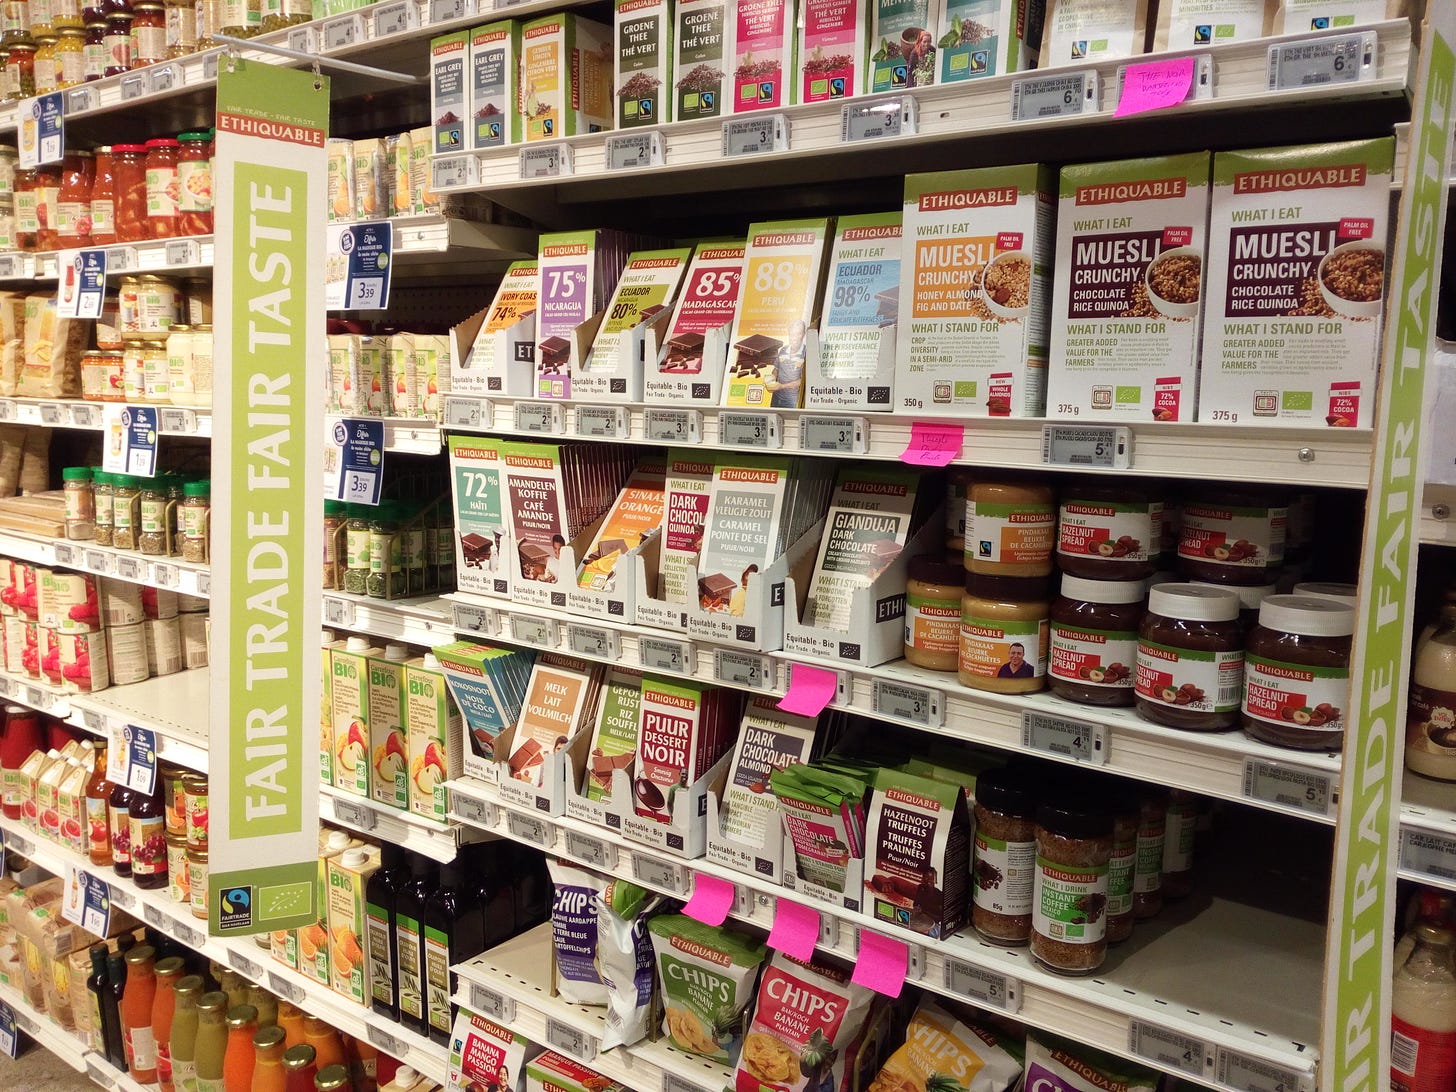 Supermarket aisle of Fairtrade-branded products under the banner 'Fair Trade Fair Taste.' Products include chocolate bars, tea, chocolate spread, spices and muesli.